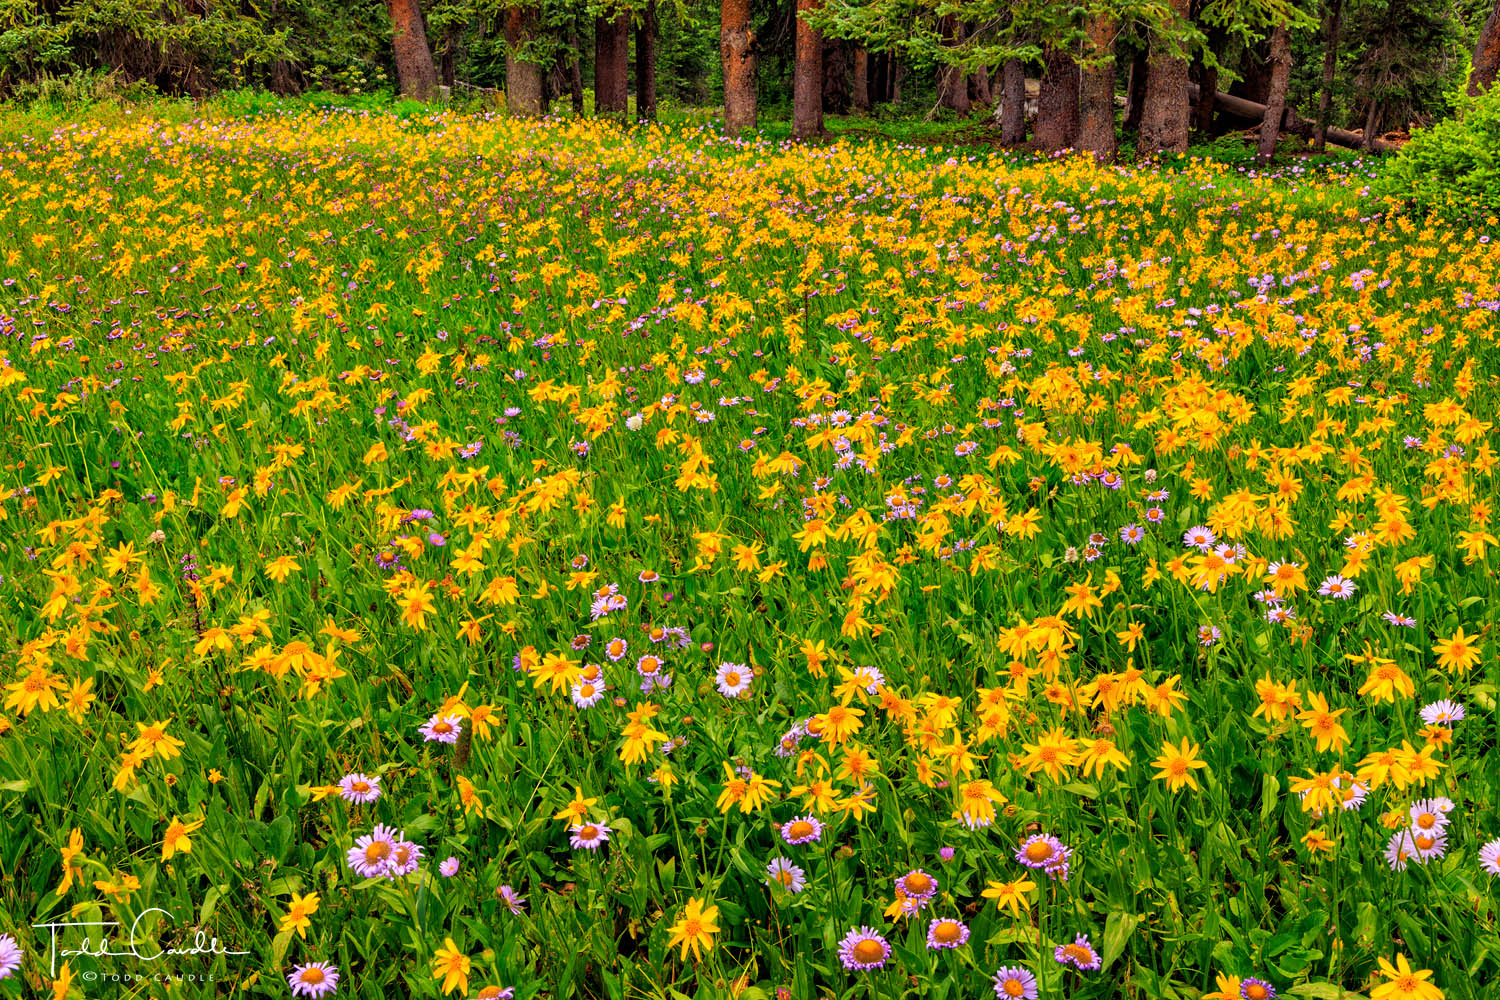 An extraordinary display of wildflowers in the Gore Range in northern Colorado.